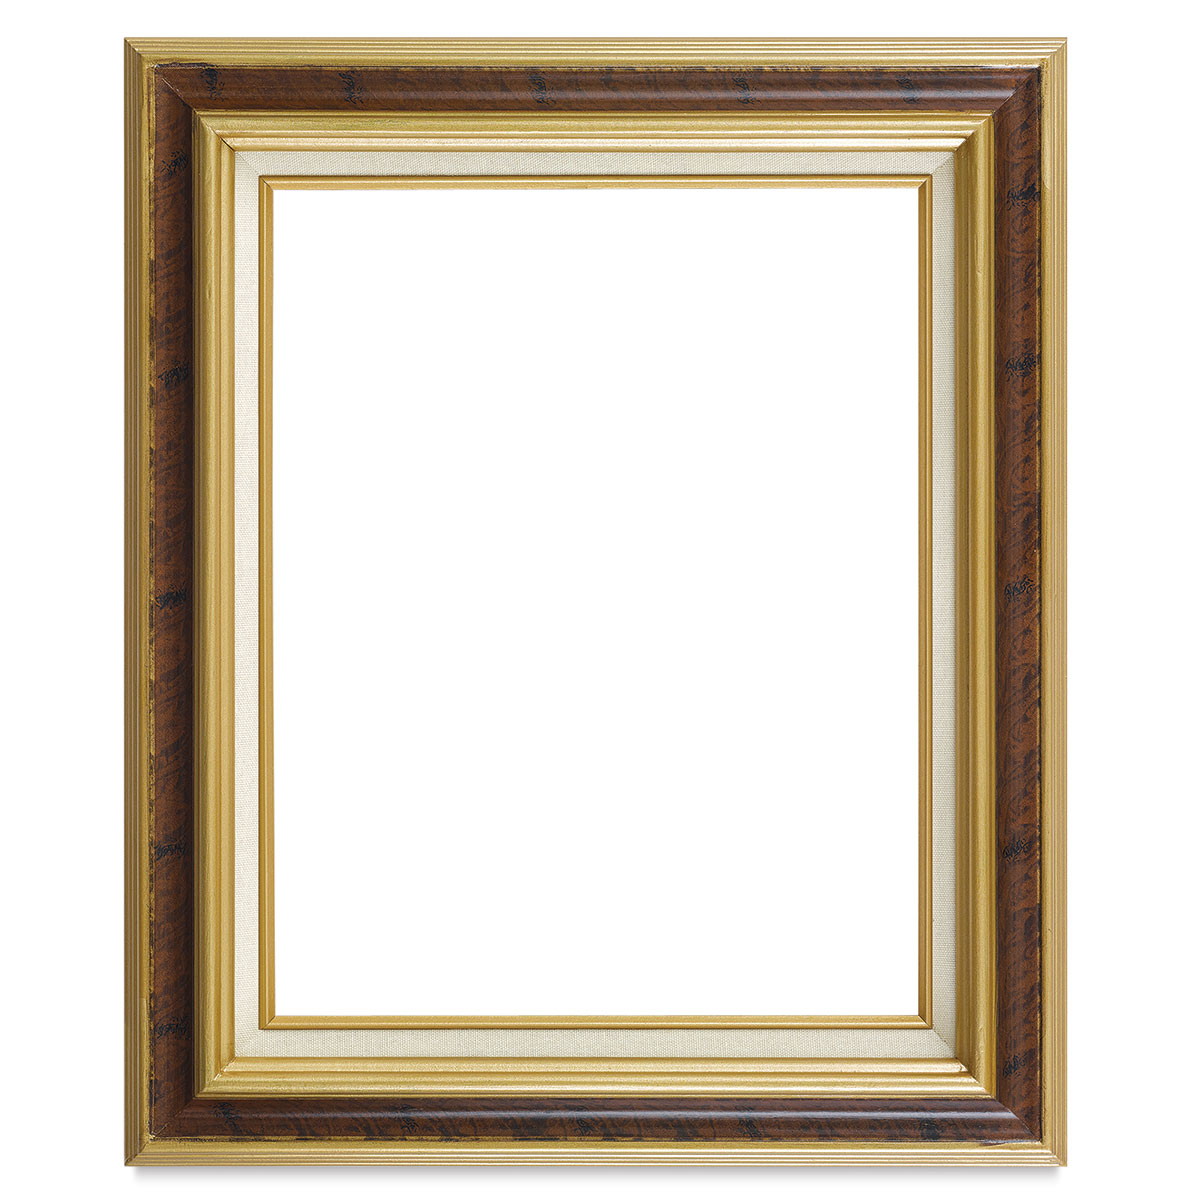 frames are finished with finequality stains and softly antiqued to give the...